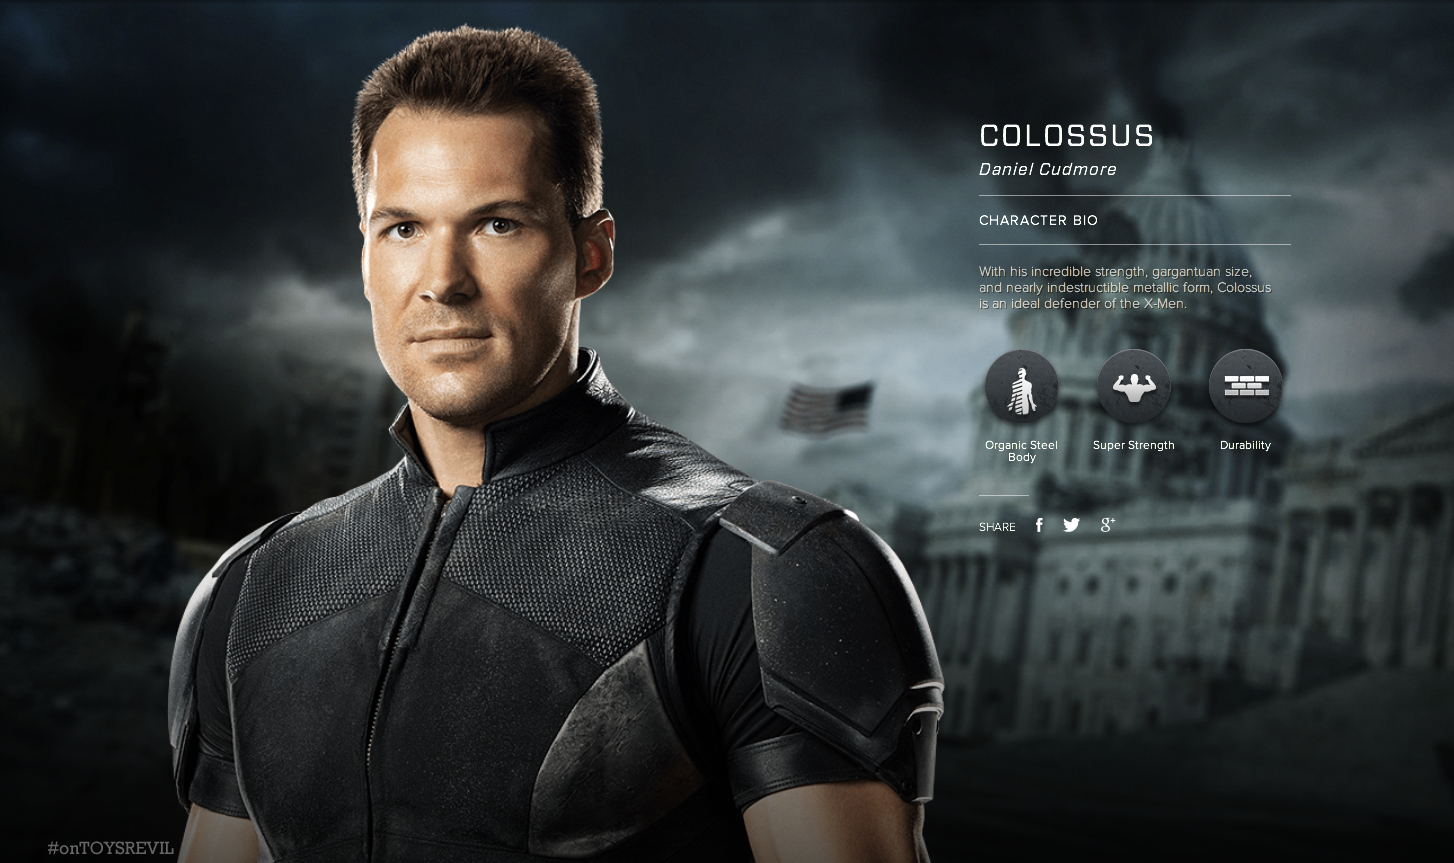 Xmen On Film Character Profiles From Official Movie Website For X Men Days Off Future Past